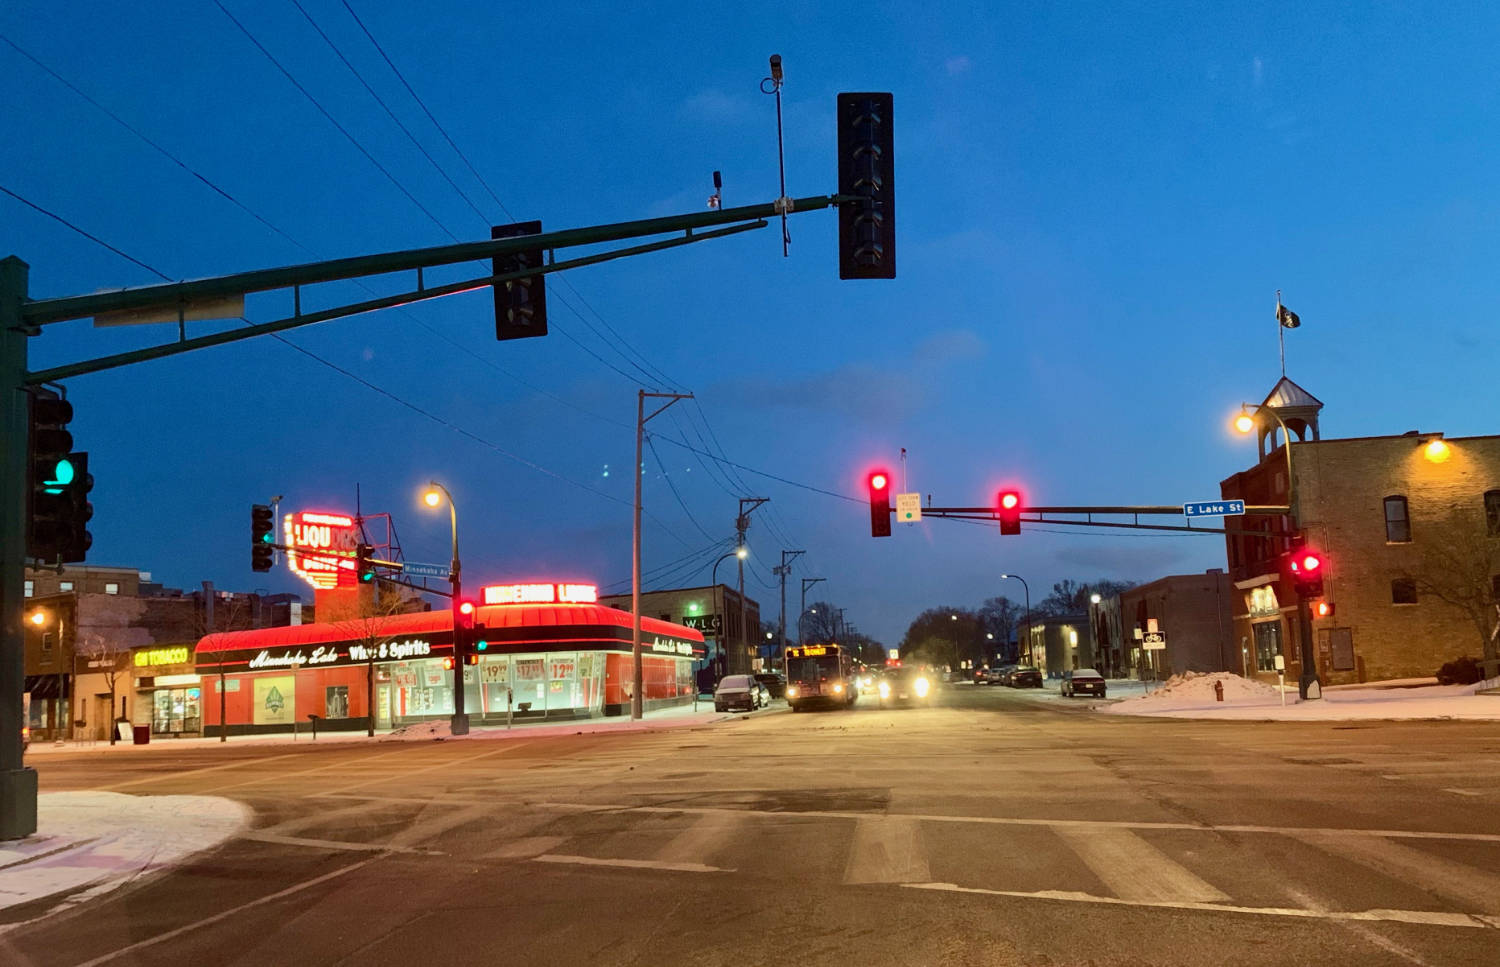 Traffic lights at intersection at dusk with Minnehaha Liquors lit sign on building in background